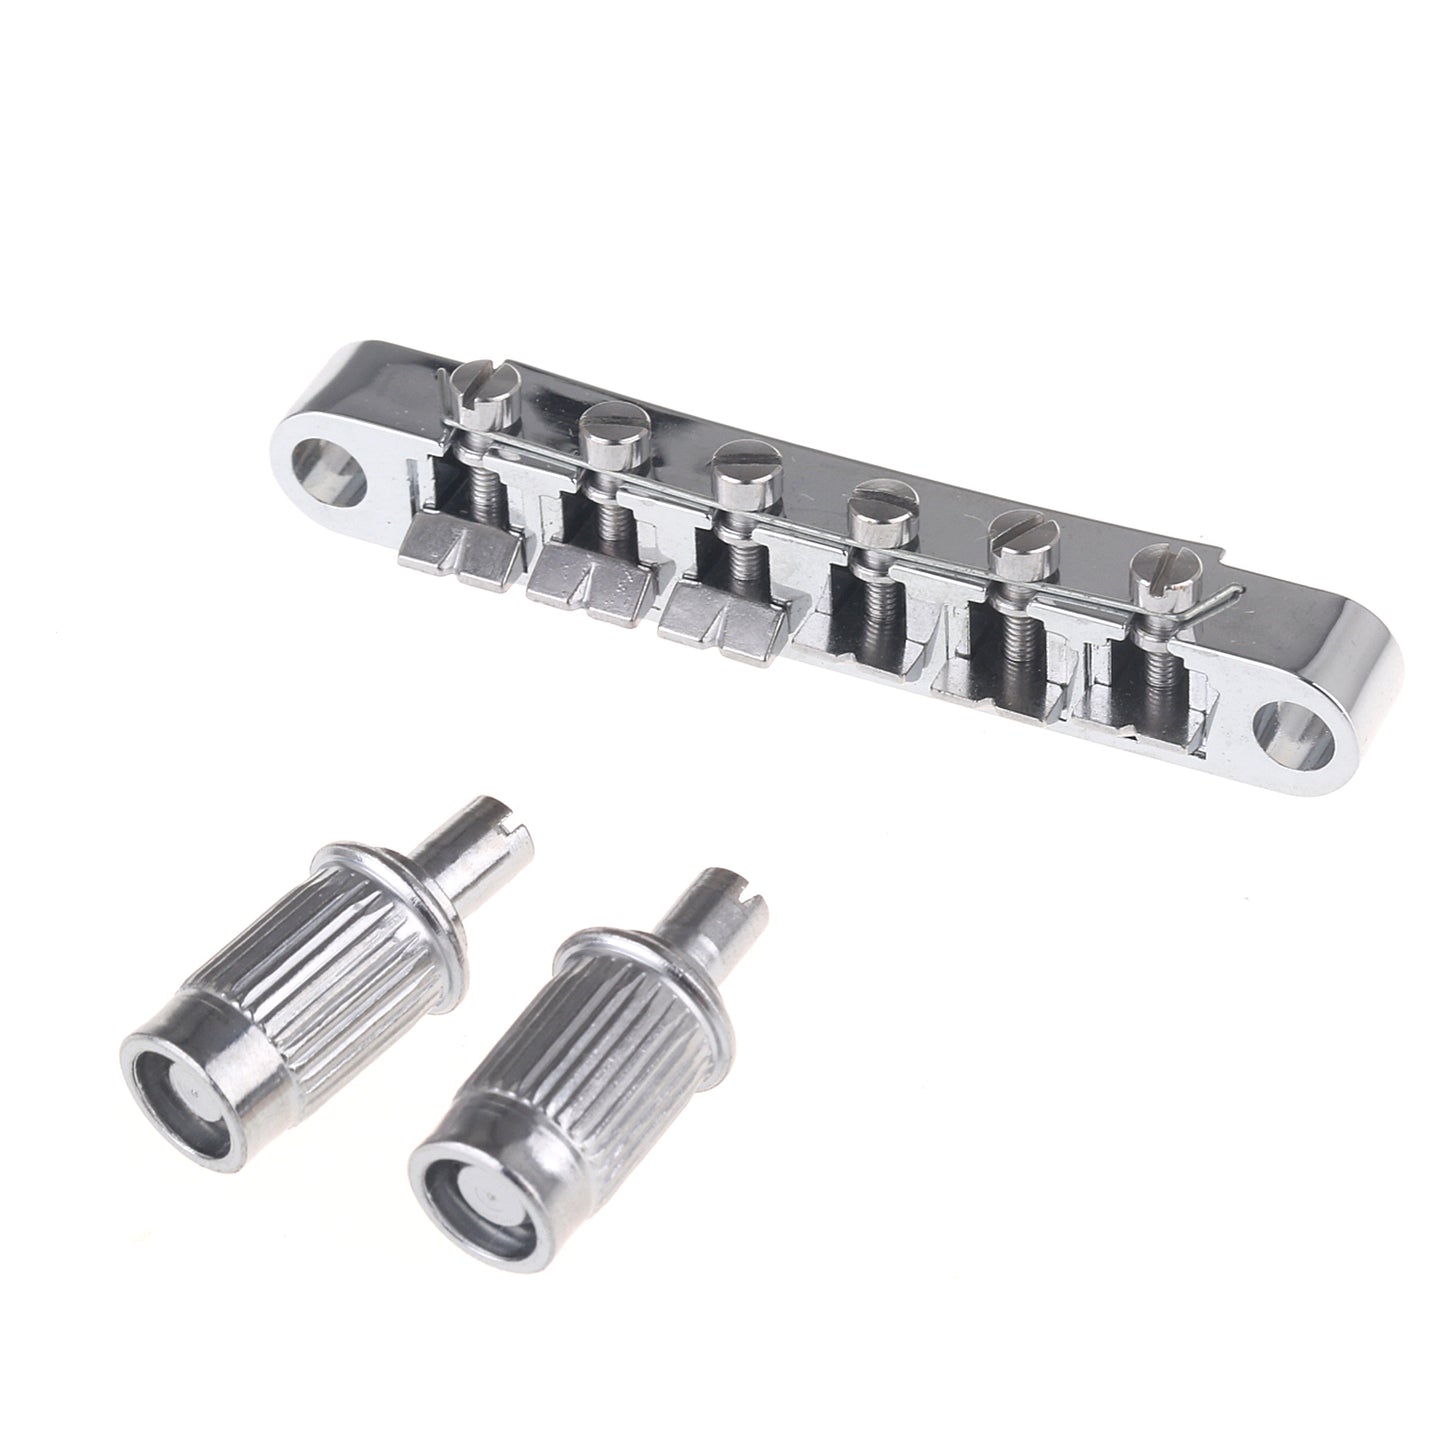 Musiclily ABR-1 Style Tuneomatic Bridge for Les Paul Style Guitar,Chrome